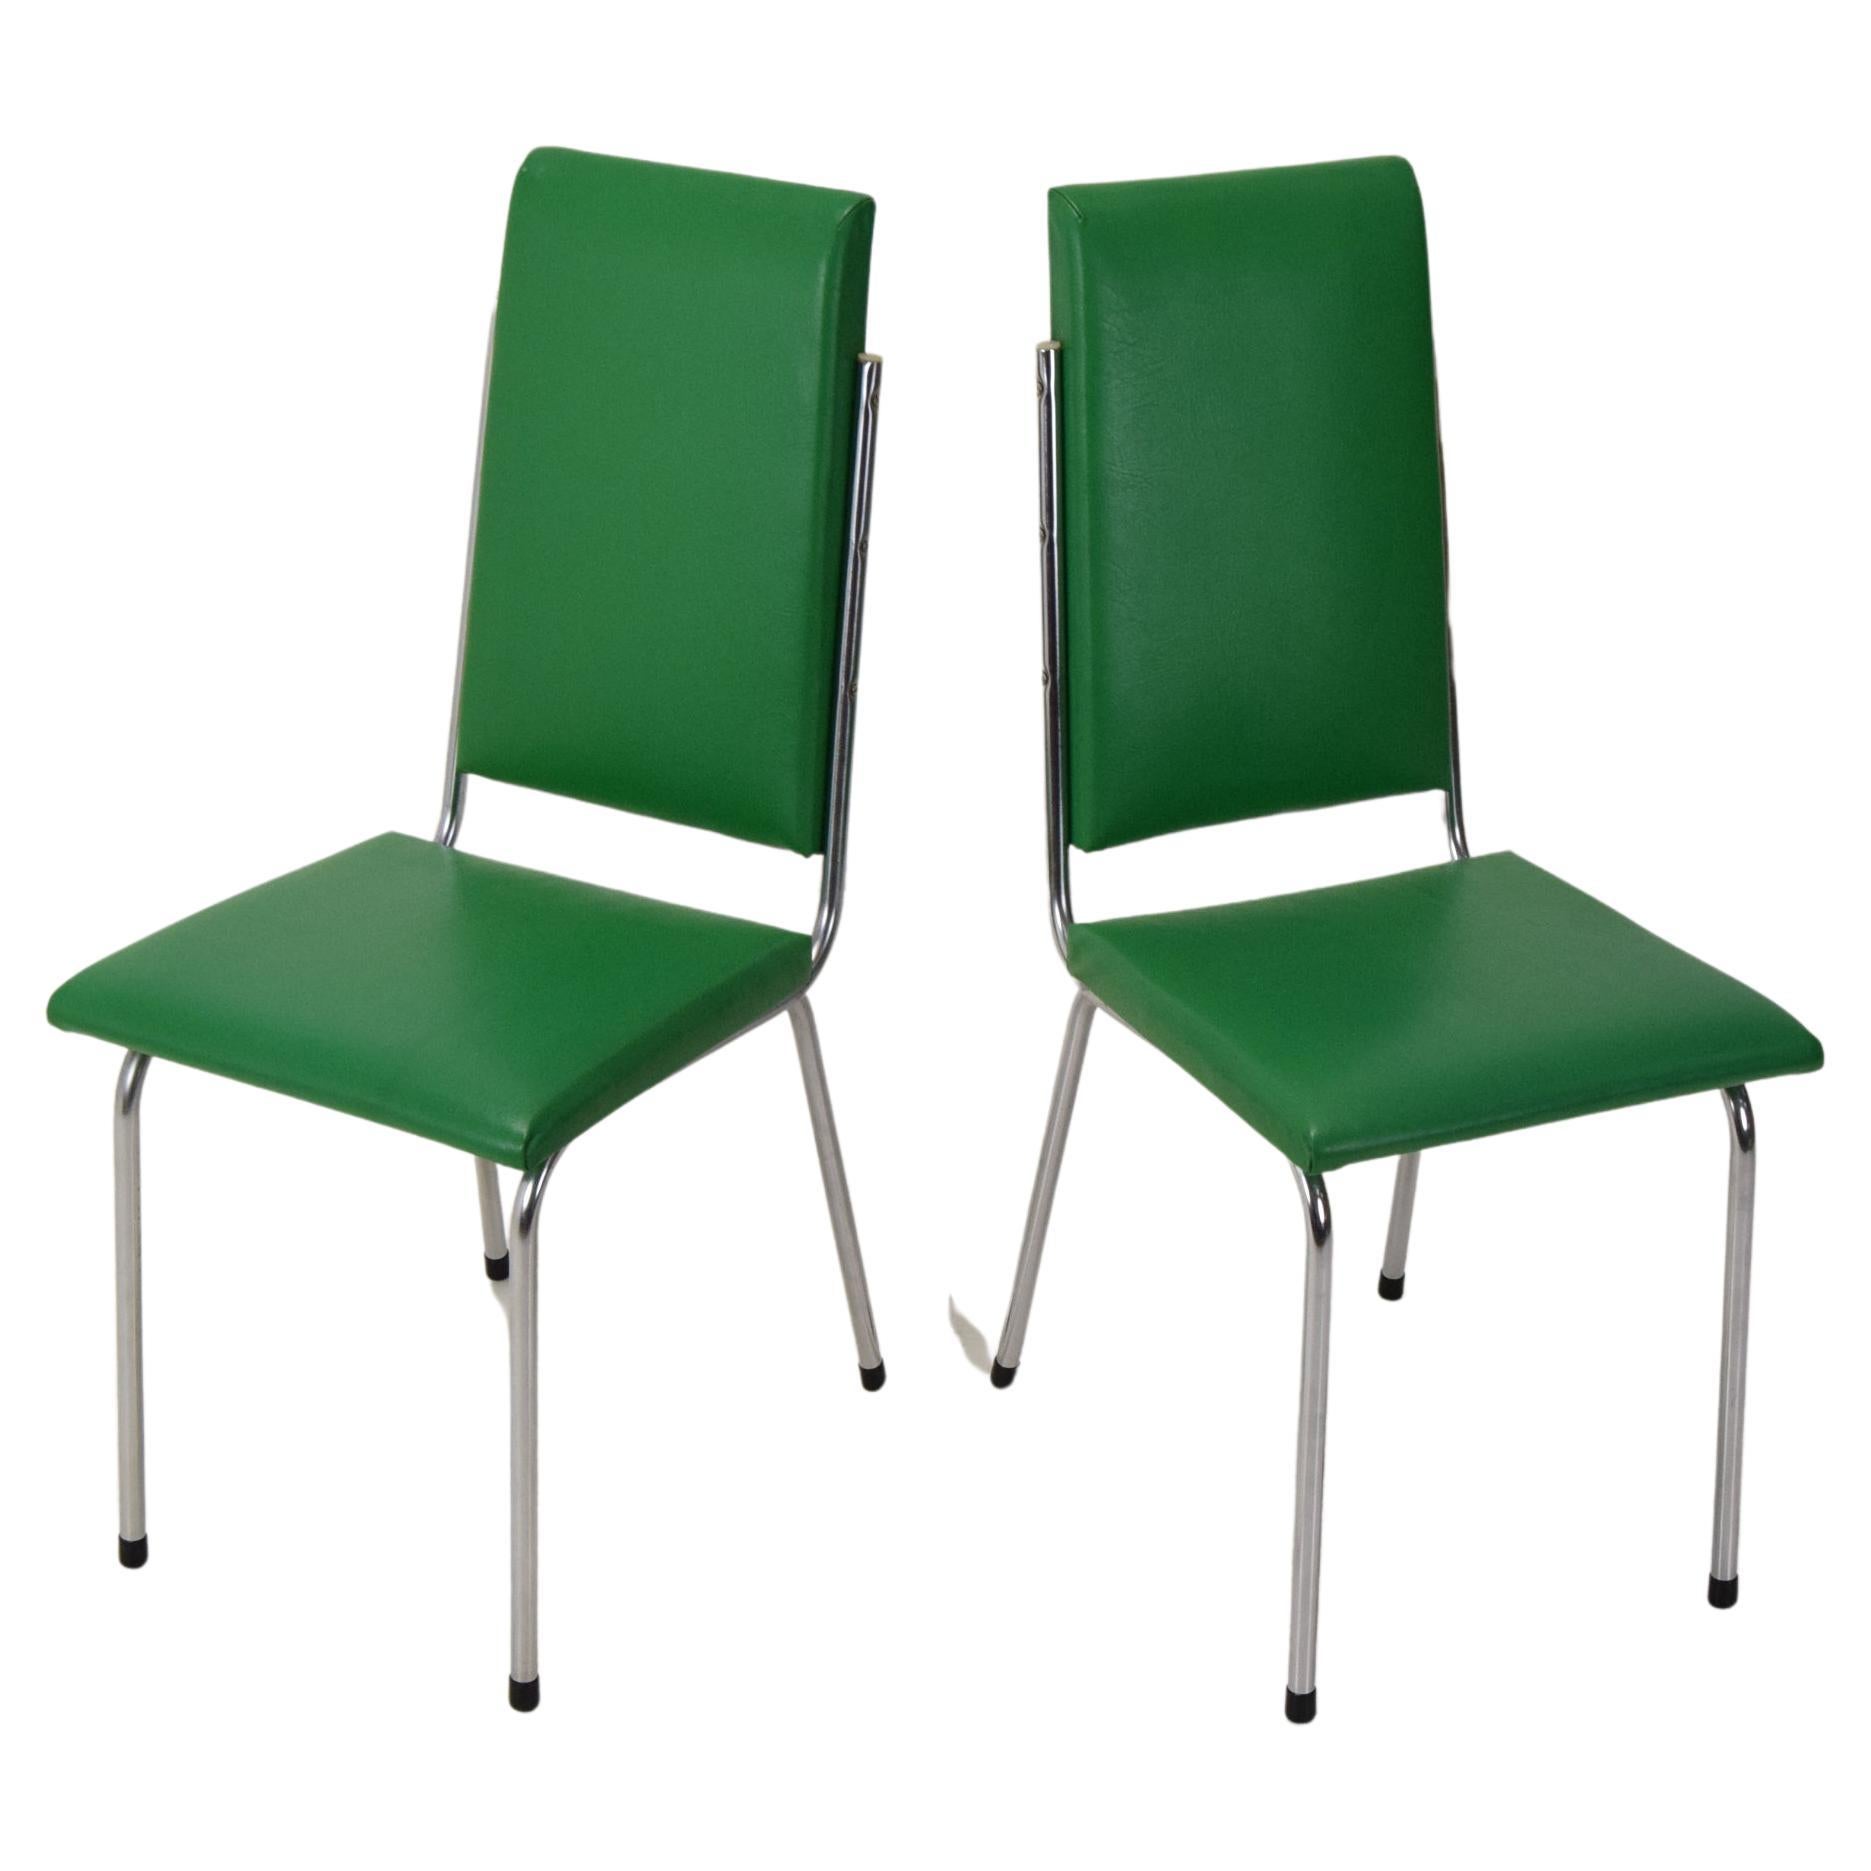 Pair Leatherette Dining Chairs of Mid-century, Czechoslovakia, 1980's. For Sale